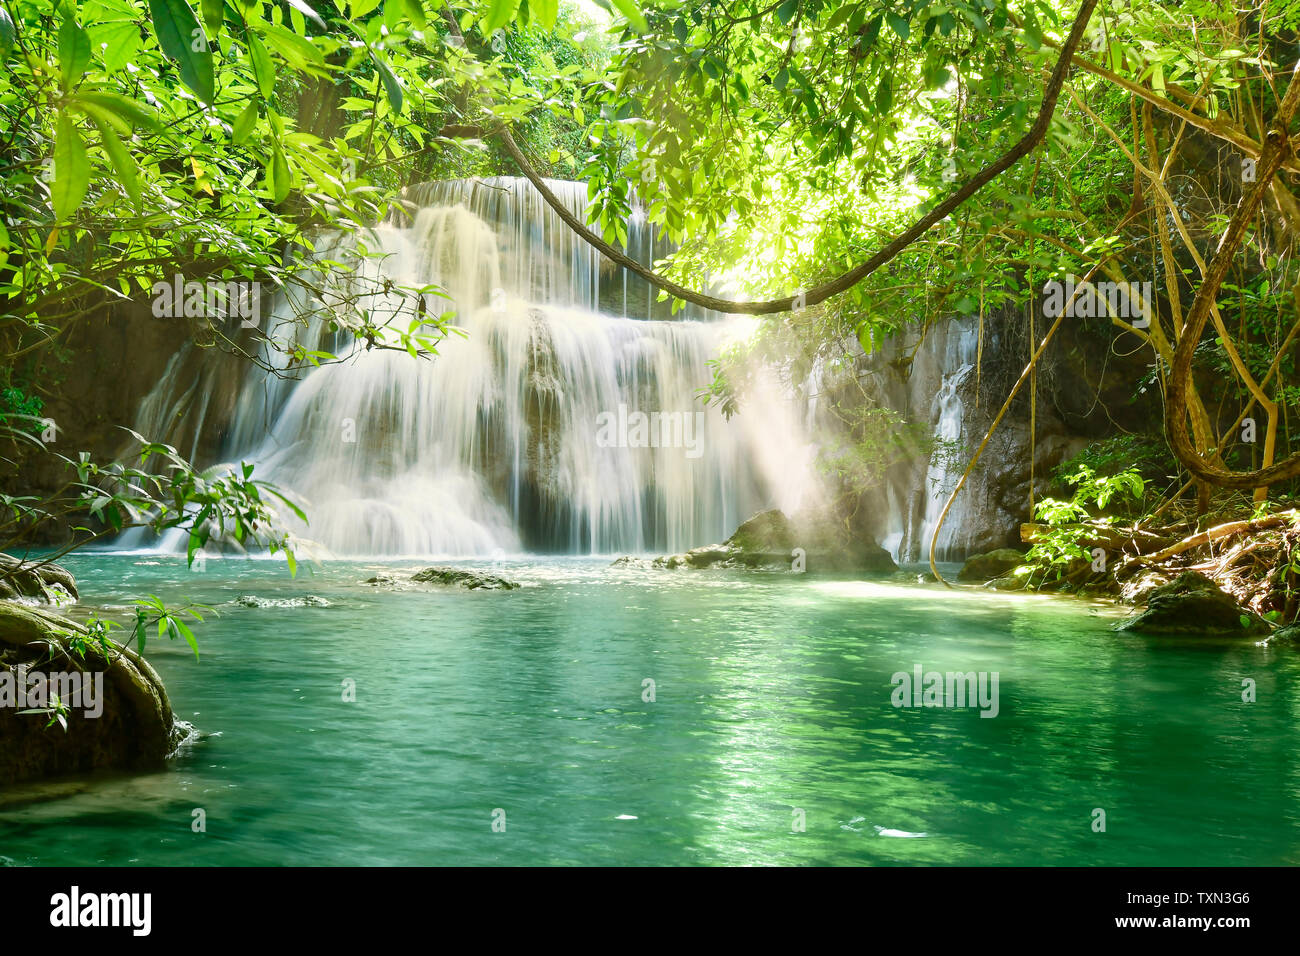 Beautiful scenic of the waterfall and green leaves for refreshing and relaxing background of Huaymaekamin Waterfall in Kanchanaburi, Thailand. Stock Photo